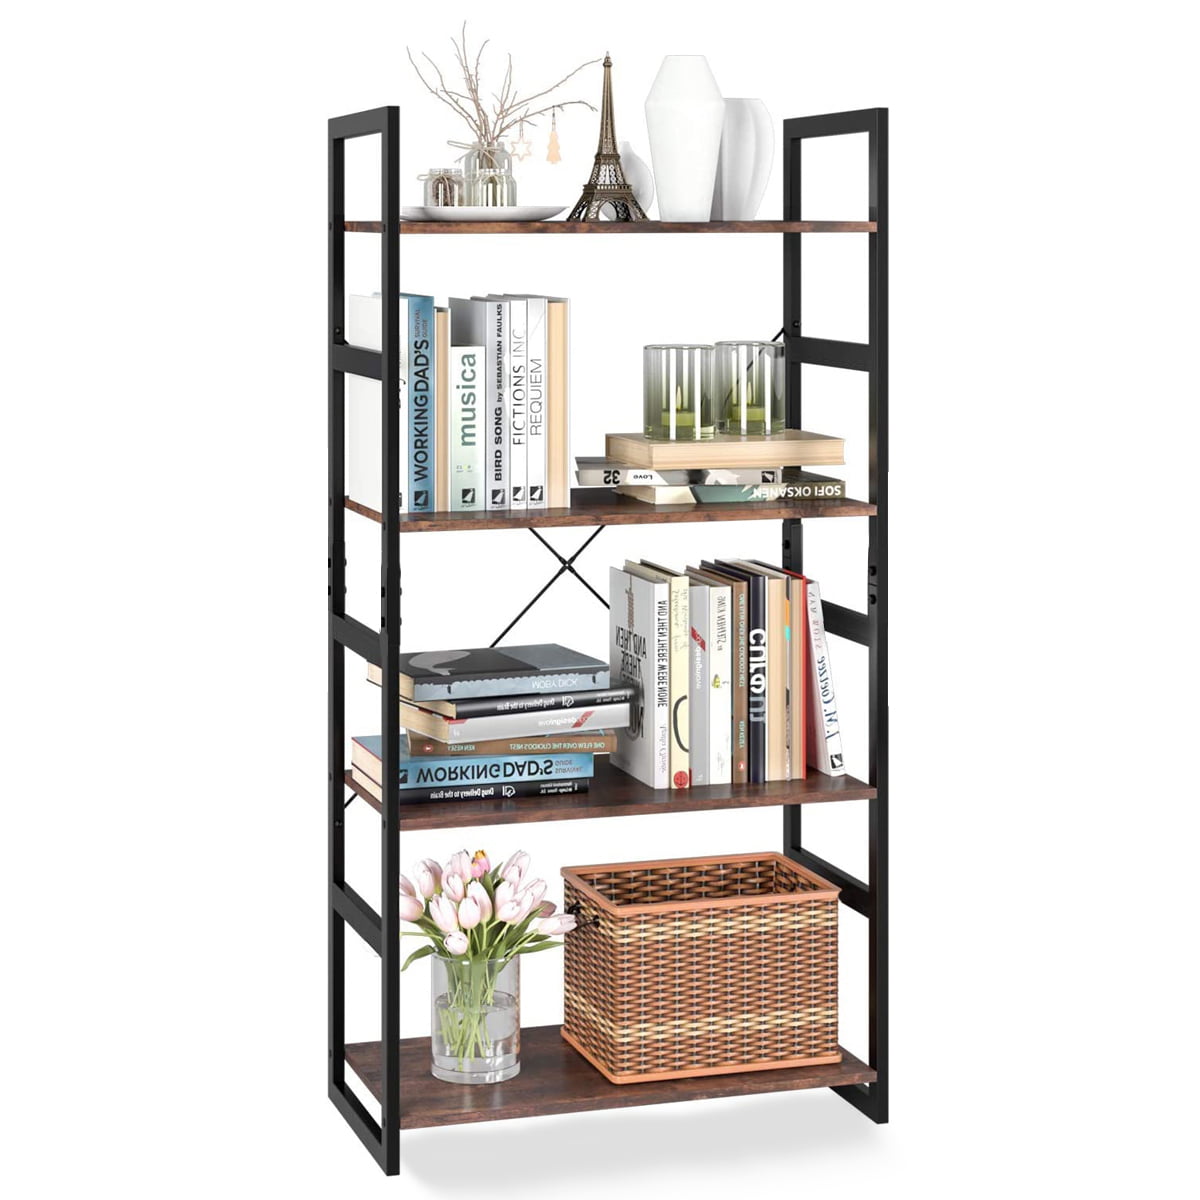 Details about   Black Wooden A Frame 3 Shelf Bookcase Storage Display Stand 3 Tier Book Case 